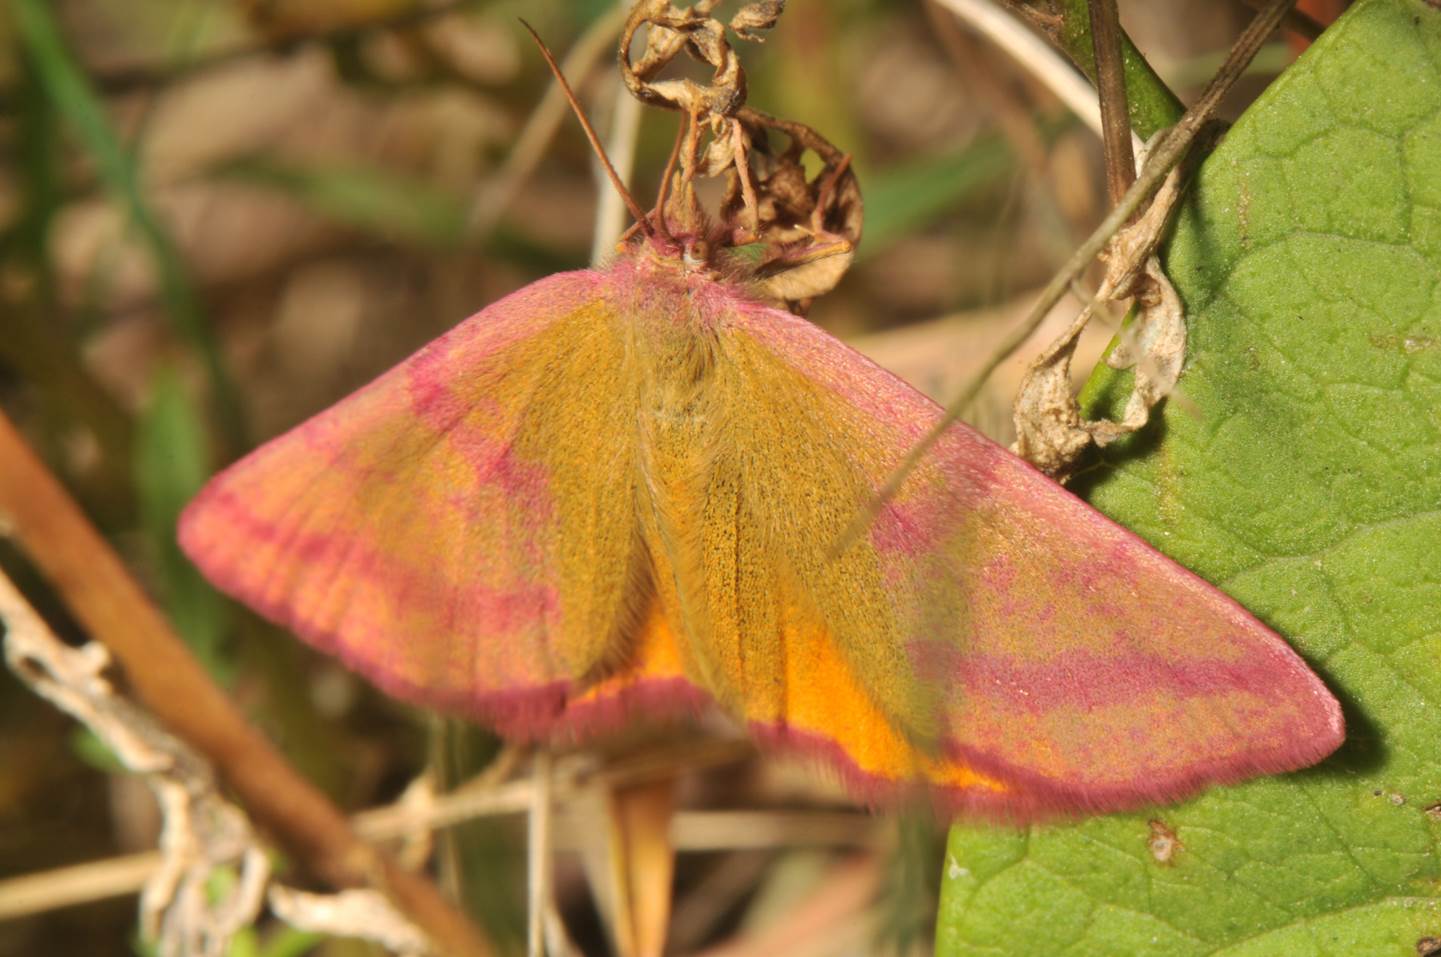 A close up of a moth

Description automatically generated